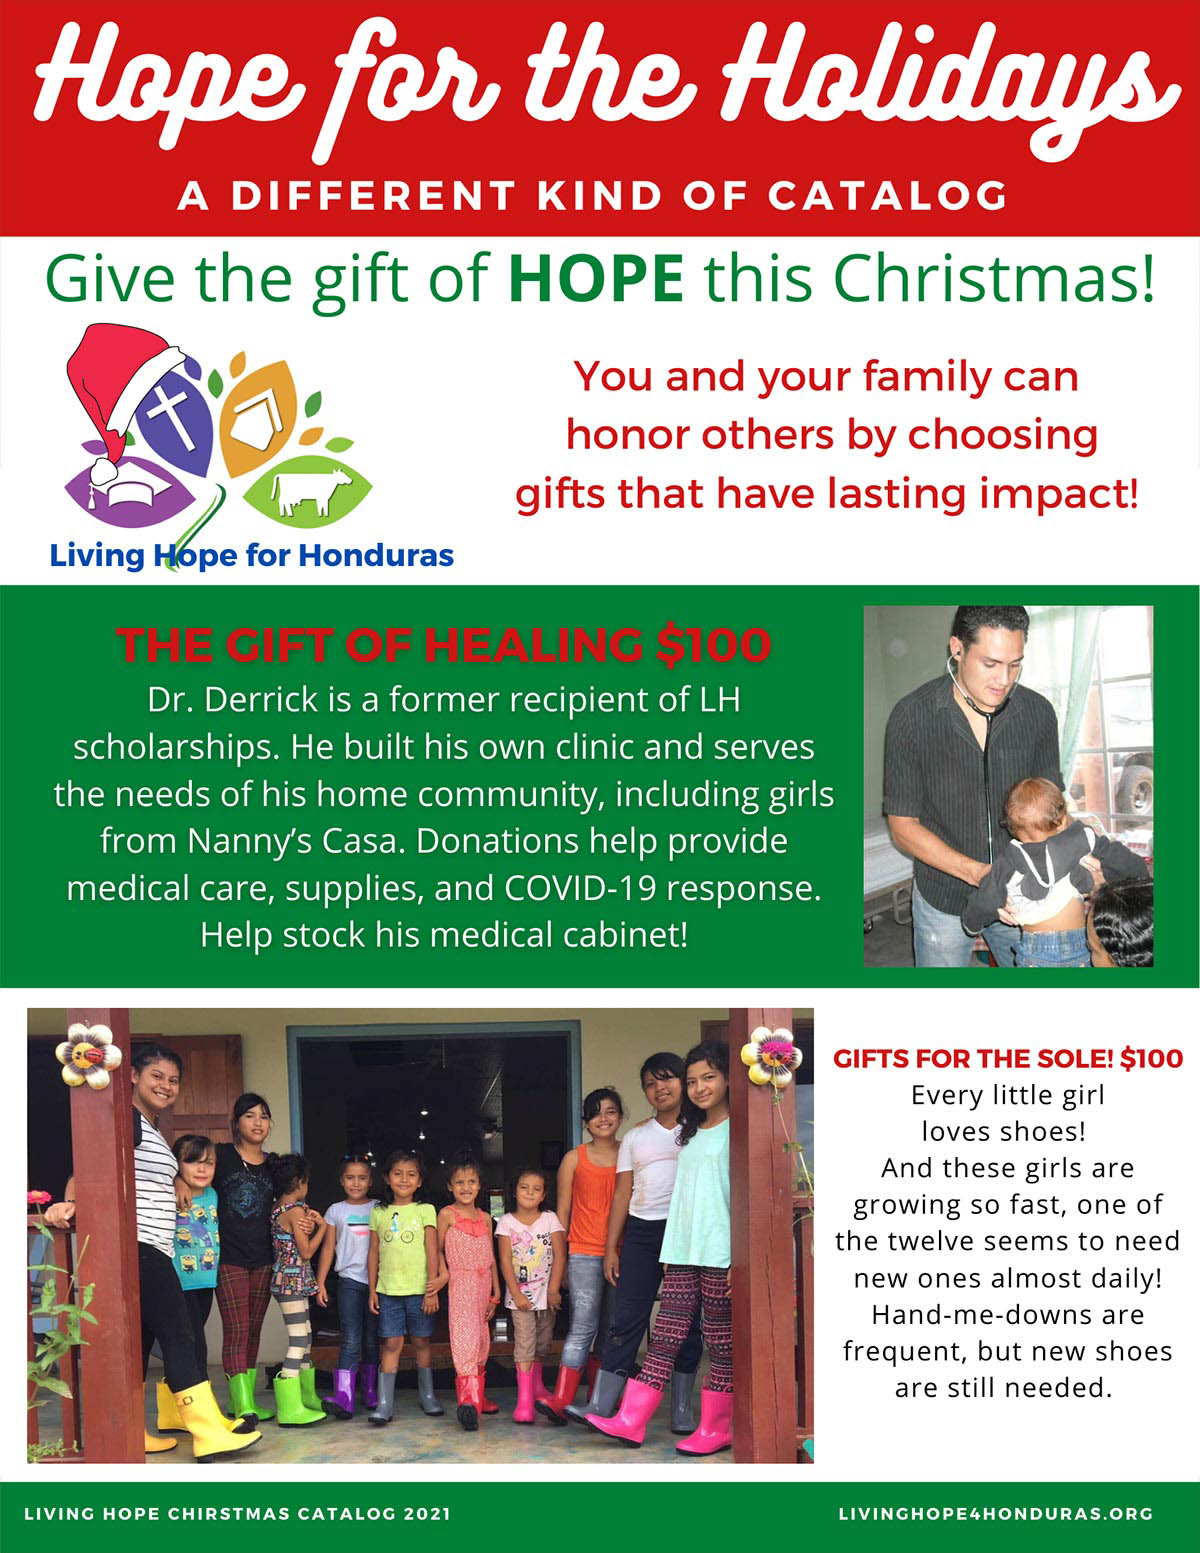 Page 1 of the Living Hope for Honduras Christmas Catalog, which outlines various levels of gifts that donors can contribute.